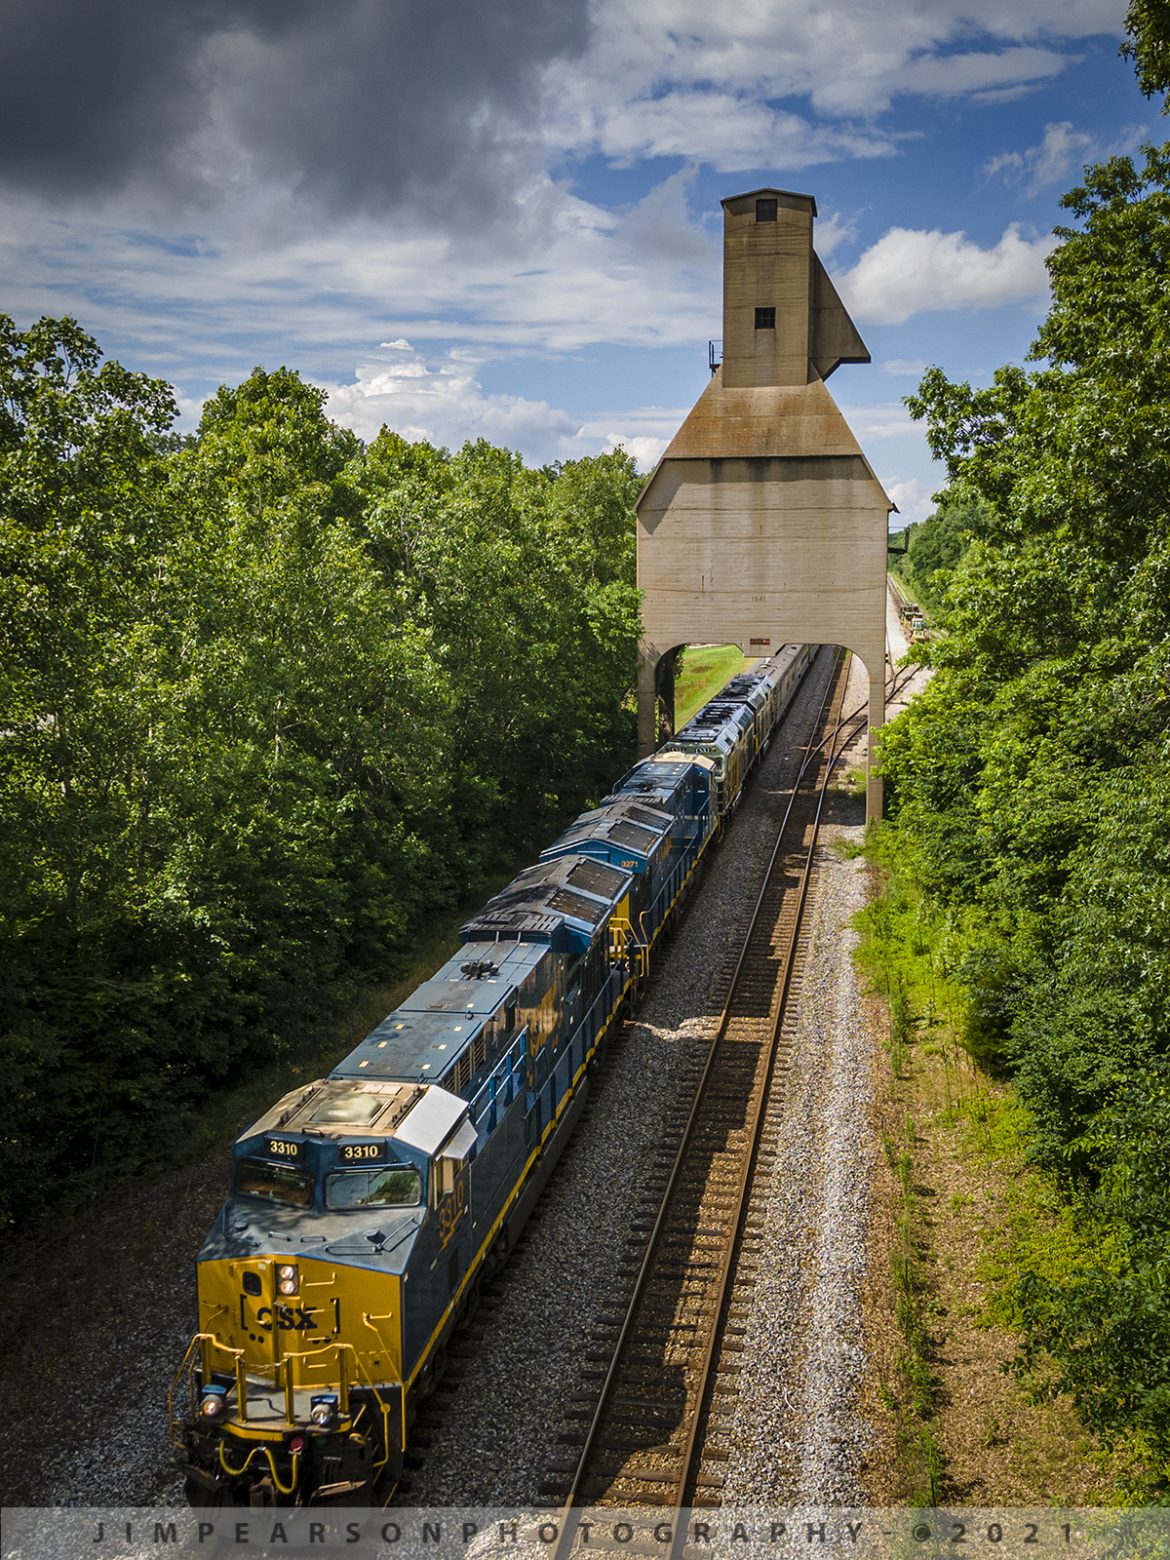 CSX President's Special P001 southbound at Sullivan, IN

CSX President's Passenger train P001 heads south as it passes under the old Louisville and Nashville Railroad coaling towers at Sullivan, IN, on the CE&D Subdivision, with CSX GEVO units 3310, 3271 leading and CSXT 1 & 2 trailing as they pull 11 cars at a little over 1,000ft long southbound on June 10th, 2021. They were leading due to issues with the DPU on the F units, which have since been fixed.

CSX repainted two of its F40PH locomotives, to be used on its business train, into predecessor Baltimore & Ohio's blue, gray, and black paint scheme. CSX1 is former 9998 (former Amtrak 288) and from what I can find out CSXT 2 is the former F40PH 9993 (former Amtrak 395. The other F40s are expected to be painted in the same scheme in the coming months as they are cycled through the shops.

Tech Info: DJI Mavic Air 2 Drone, RAW, 4.5mm (24mm equivalent lens) f/2.8, 1/500, ISO 100.